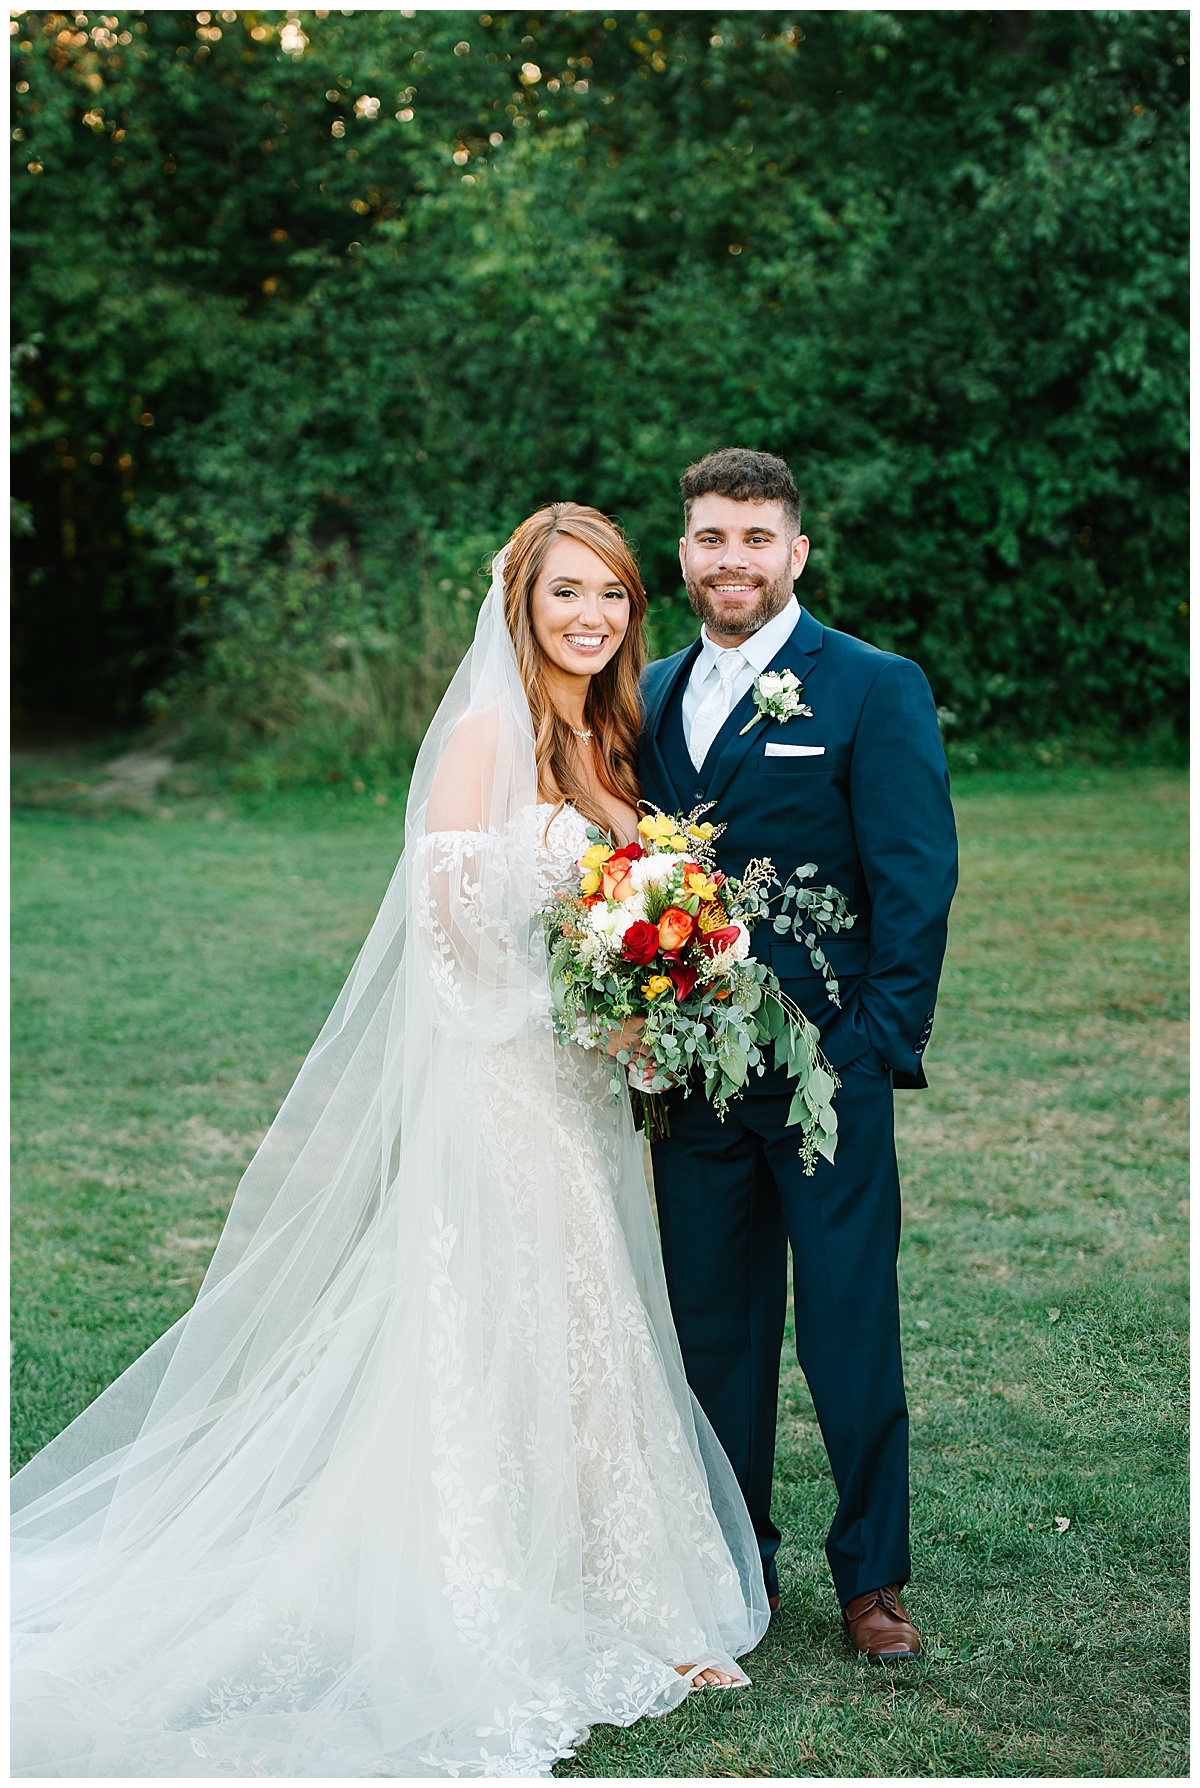 Husband and wife smile together for Michigan Wedding Photographer